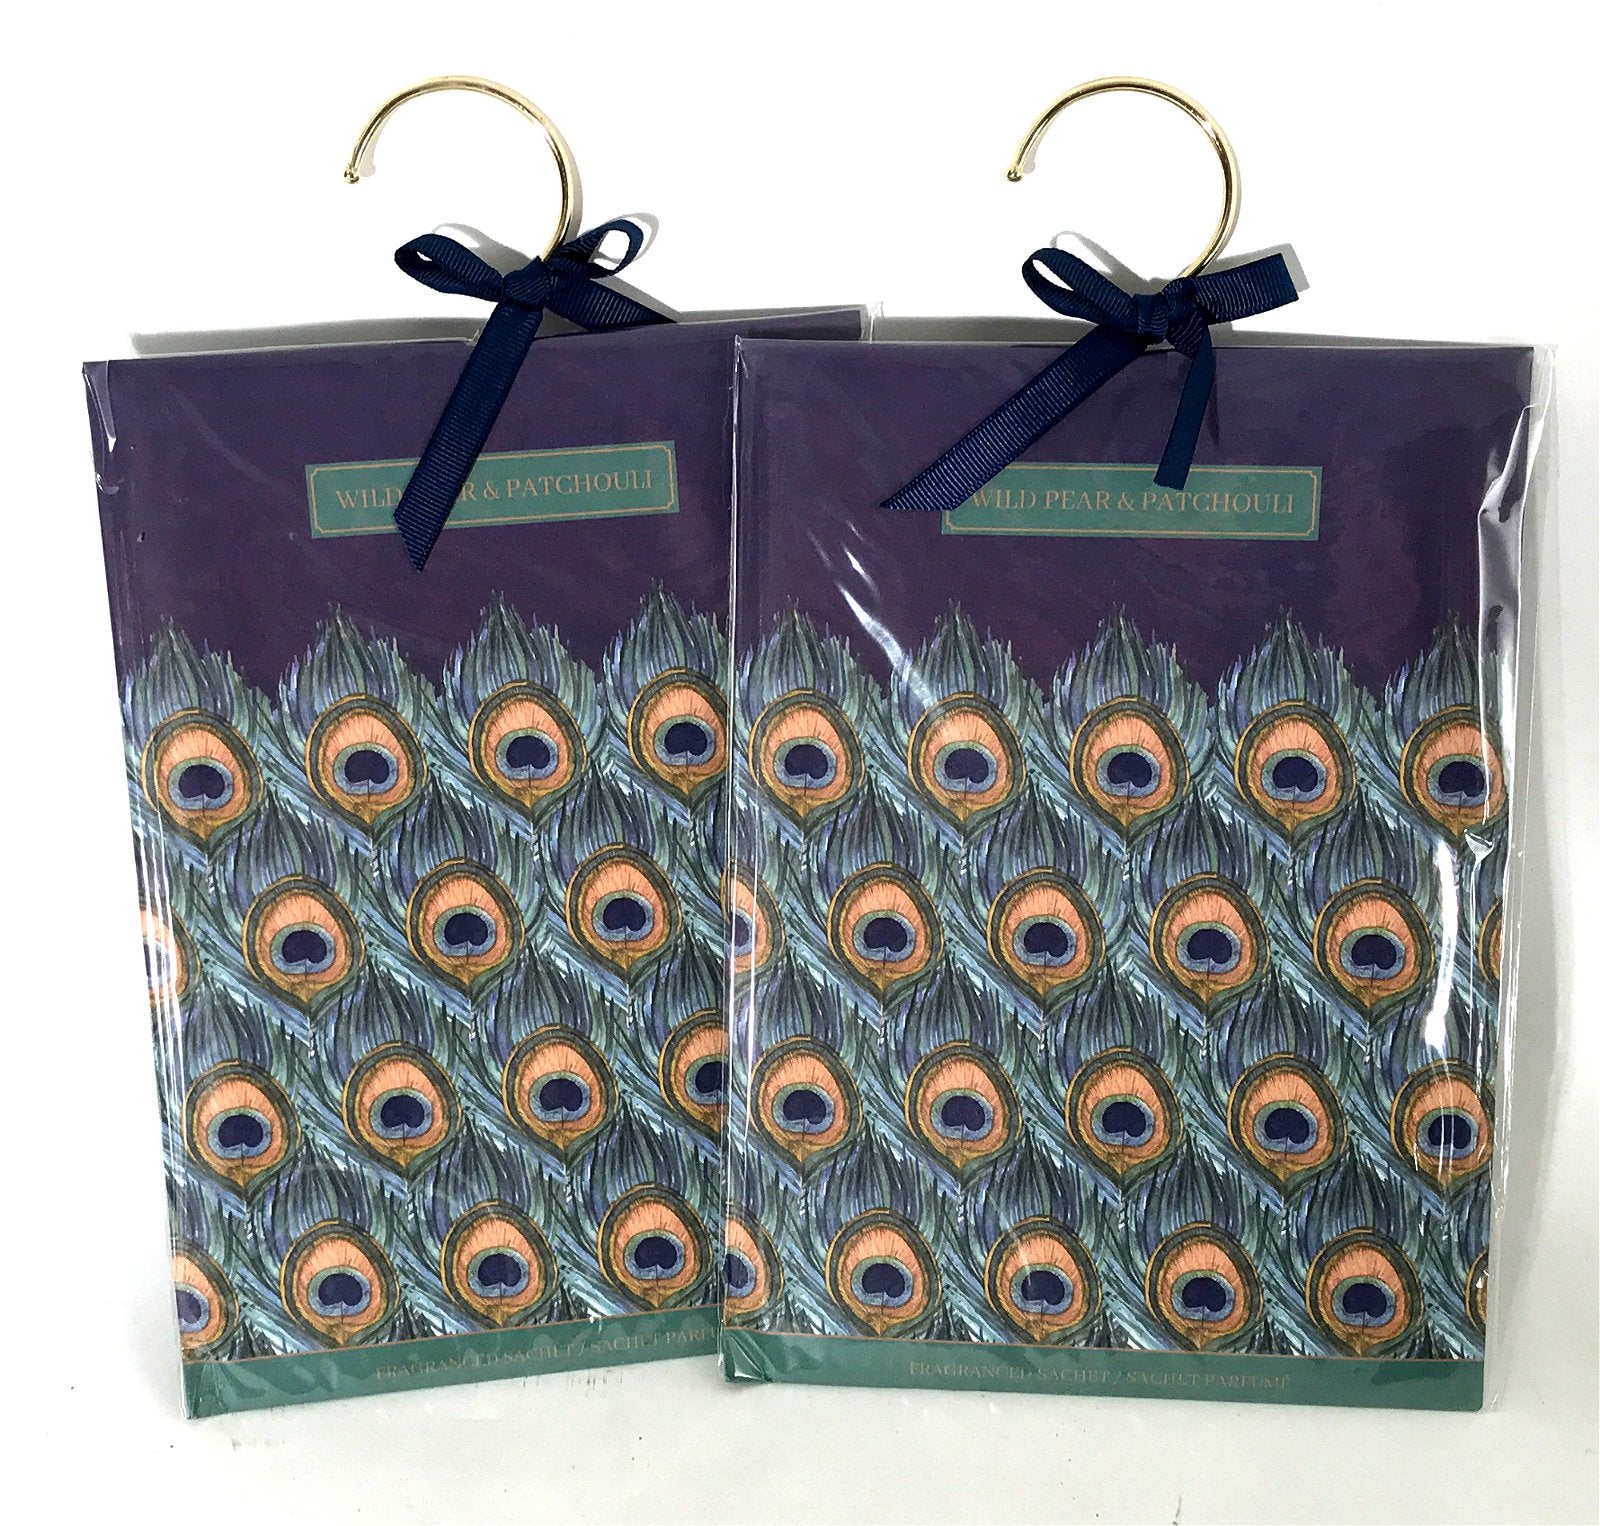 Pair Of Wild Pear & Patchouli Scented Wardrobe Sachet